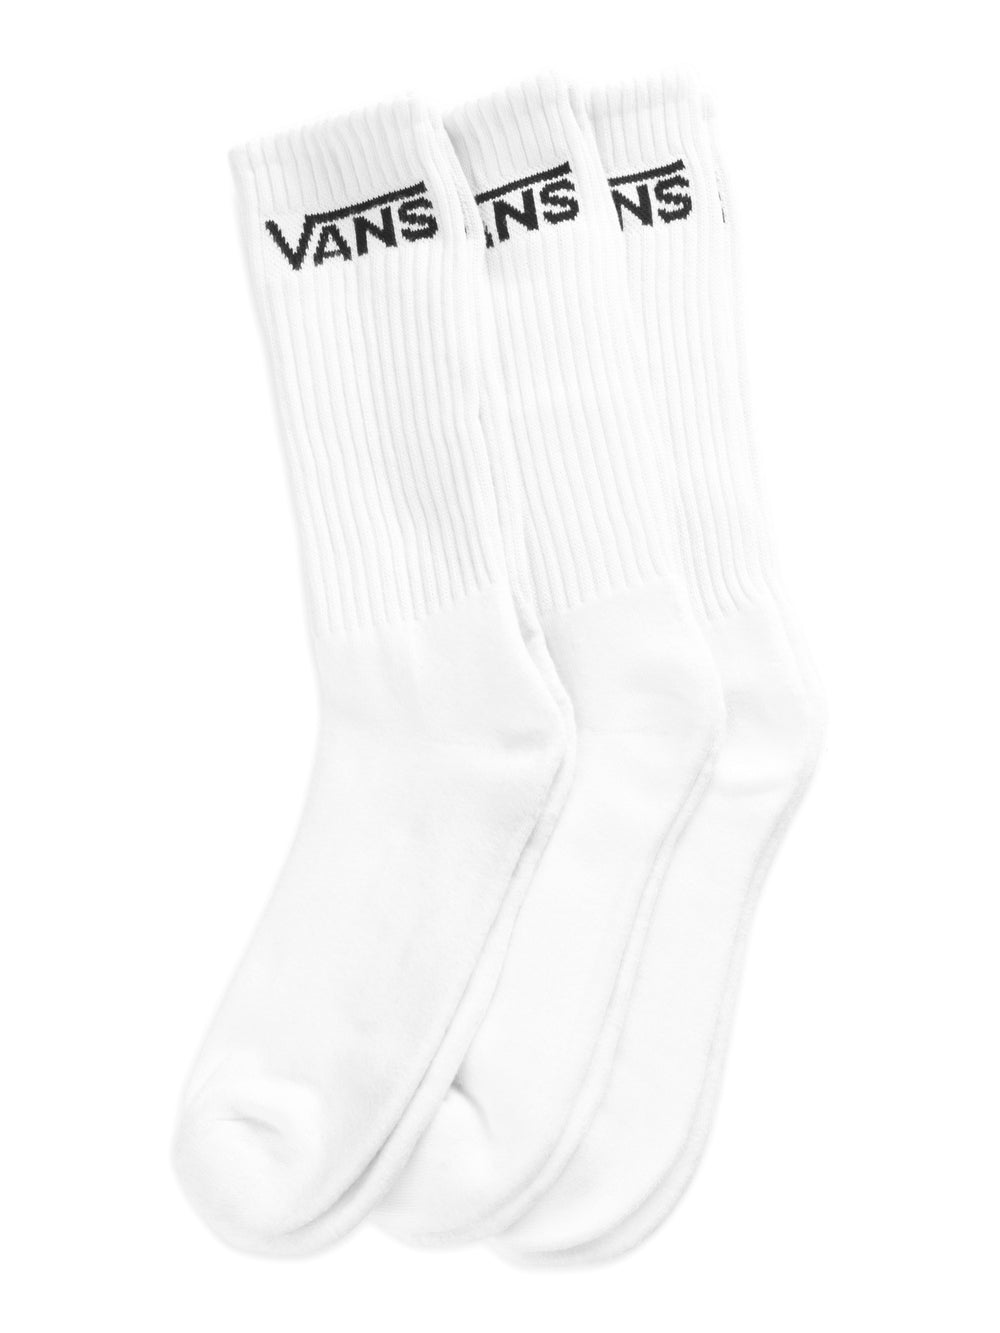 VANS CLASSIC CREW 3 Boathouse Collective | PACK Footwear SOCKS